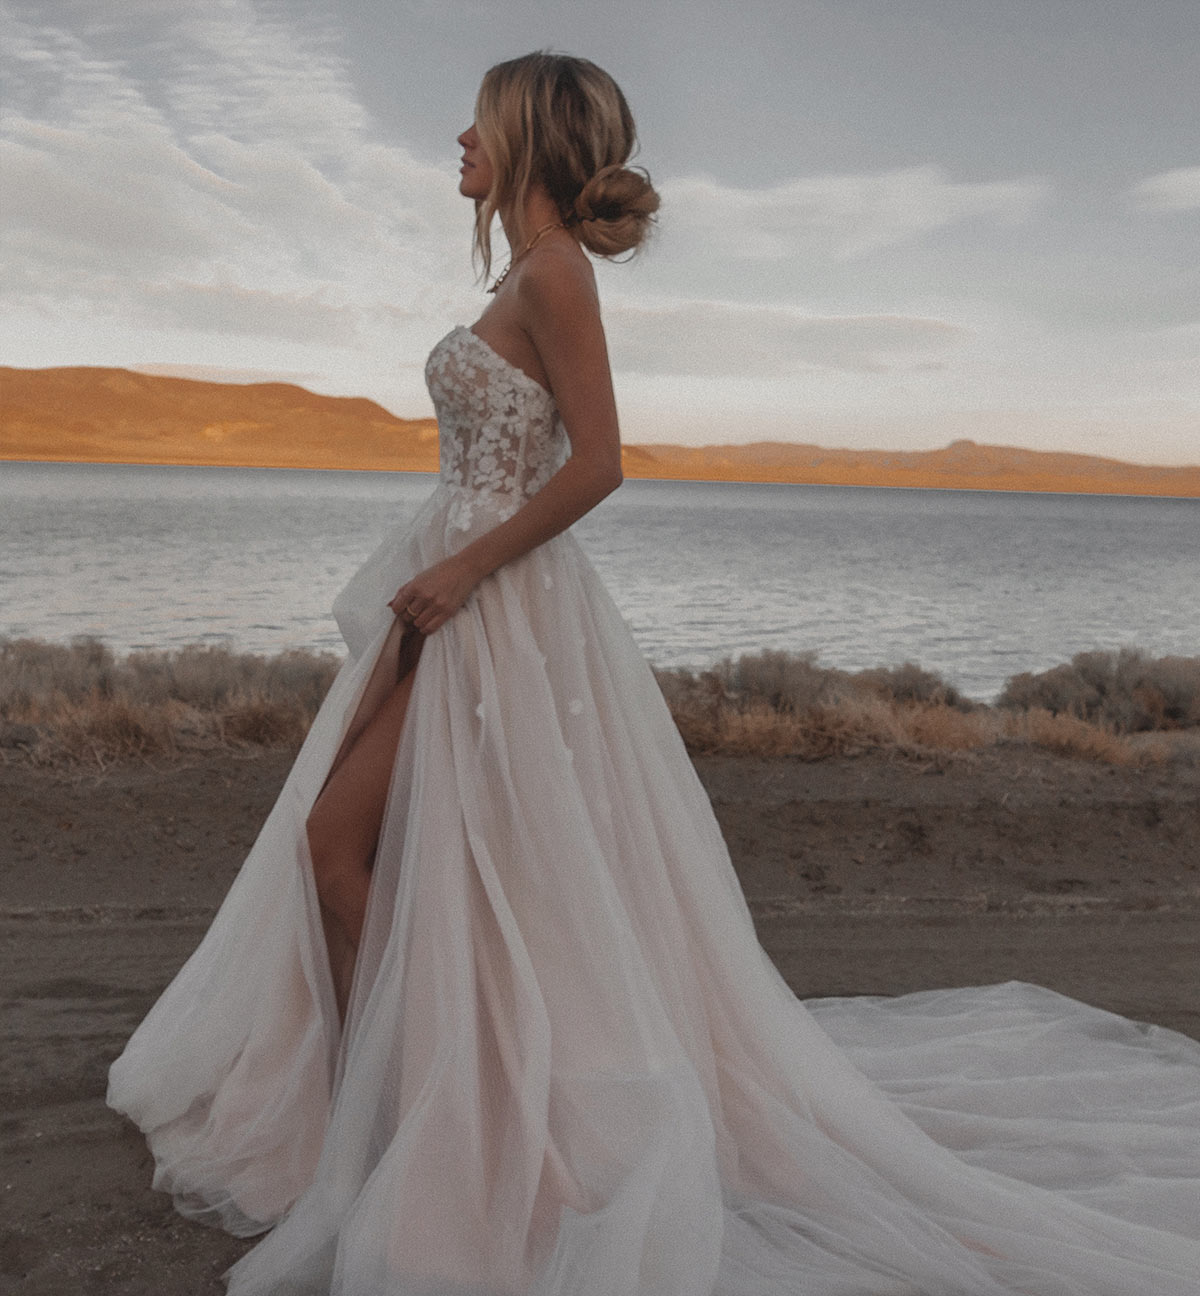 A-Line Wedding Dress with Sweetheart Neckline and Lace Detail - off the rack wedding dress